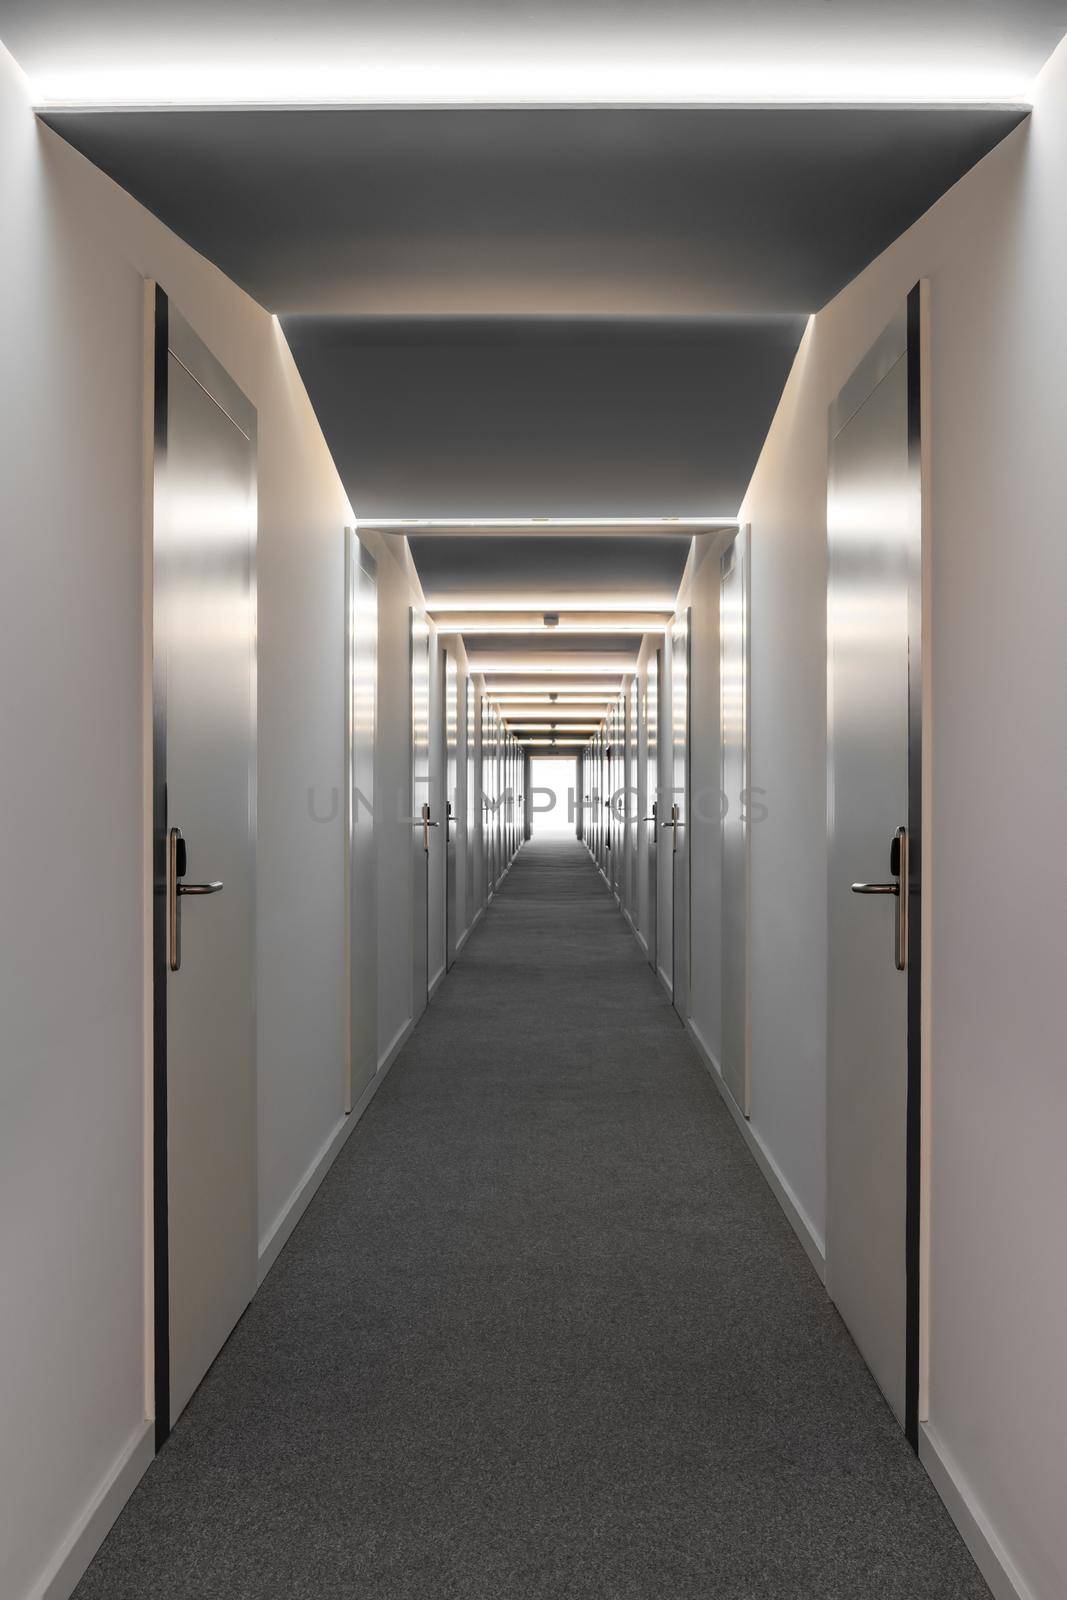 Long corridor in an office or hotel with room doors from both sides by apavlin